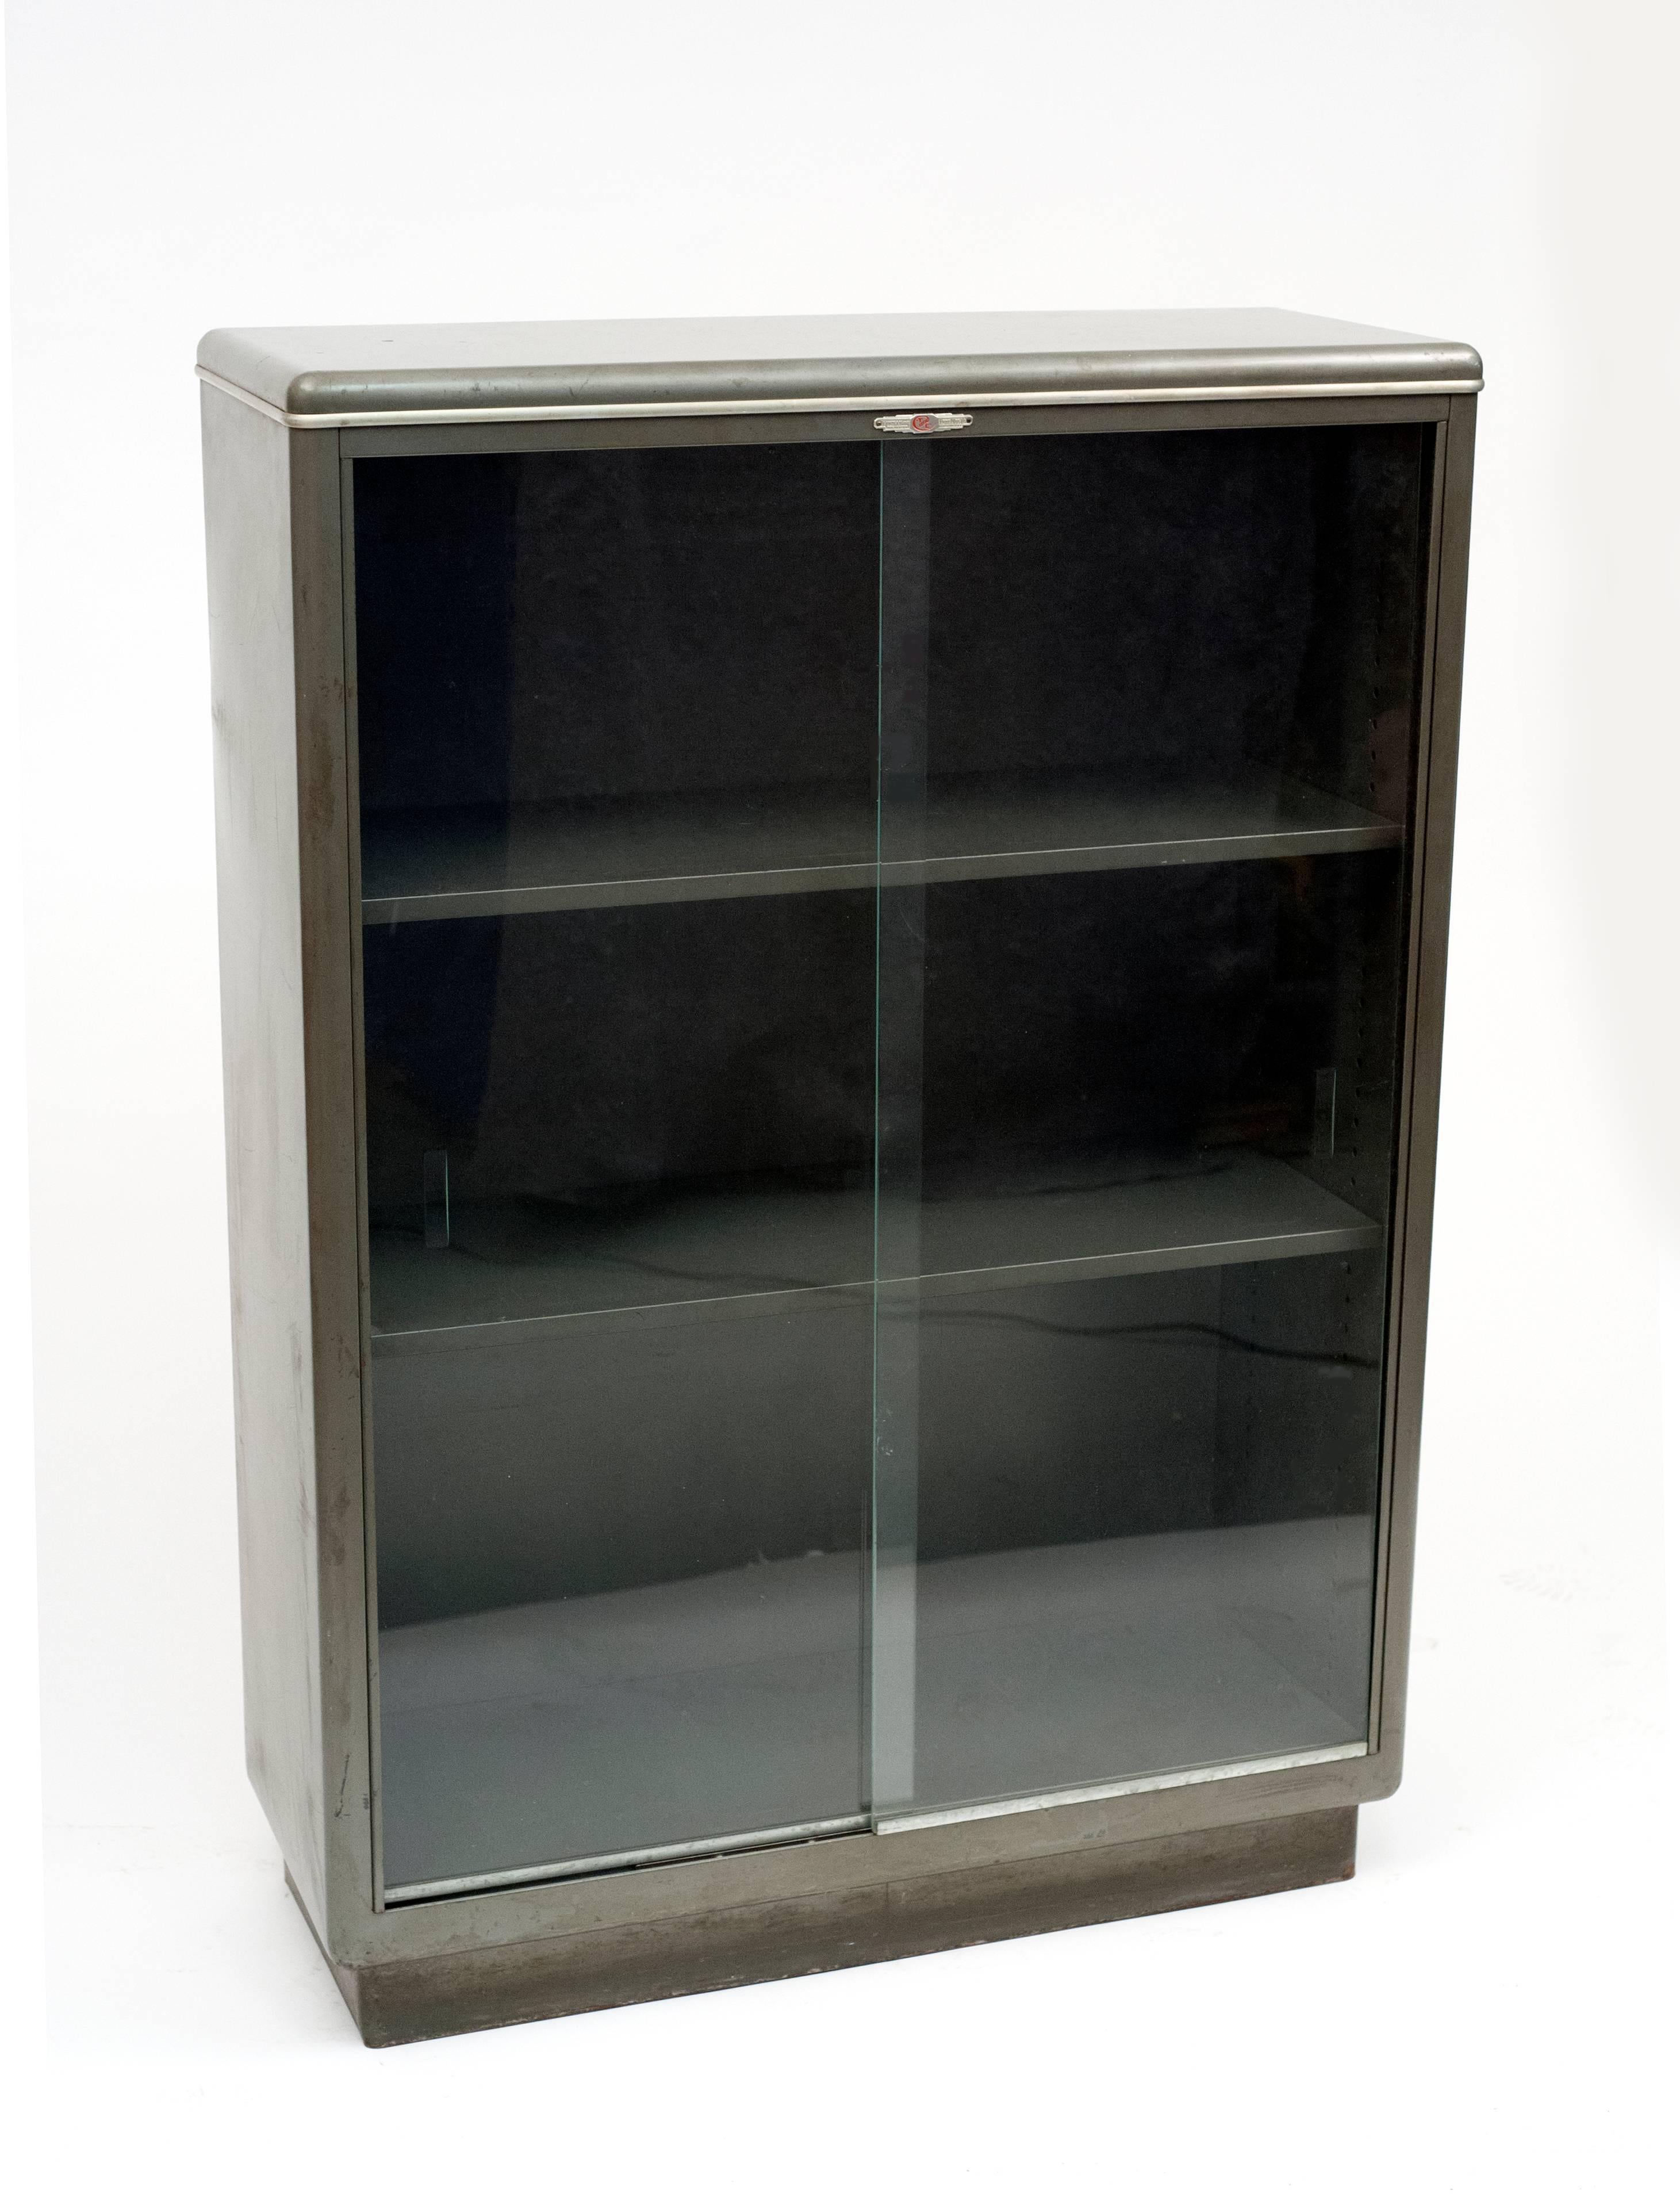 American streamlined Industrial bookcase dating back to the 1940s. Bookcase is complete with original sliding glass doors on ball bearings. Everything is original. Metal shelves are adjustable. Well designed bookcase is a great way to protect books